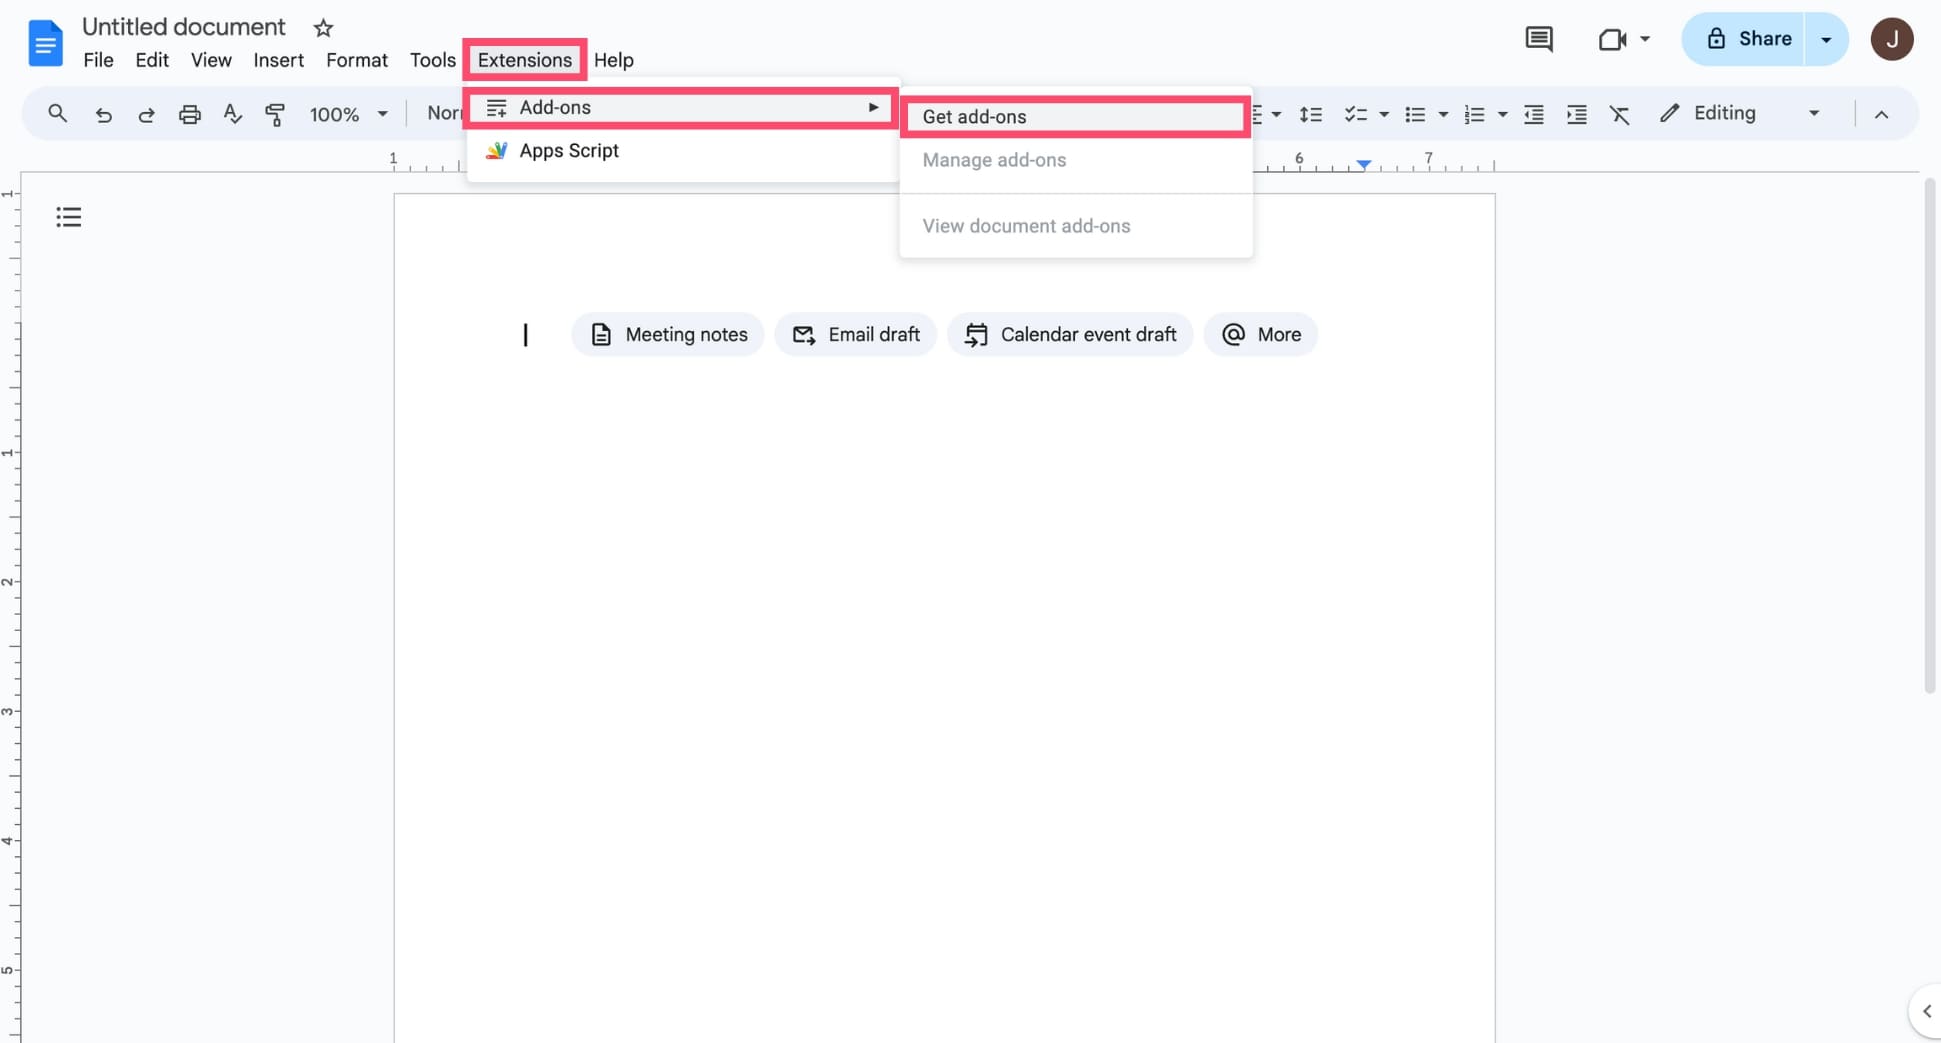 Open the add-ons menu in Google Docs